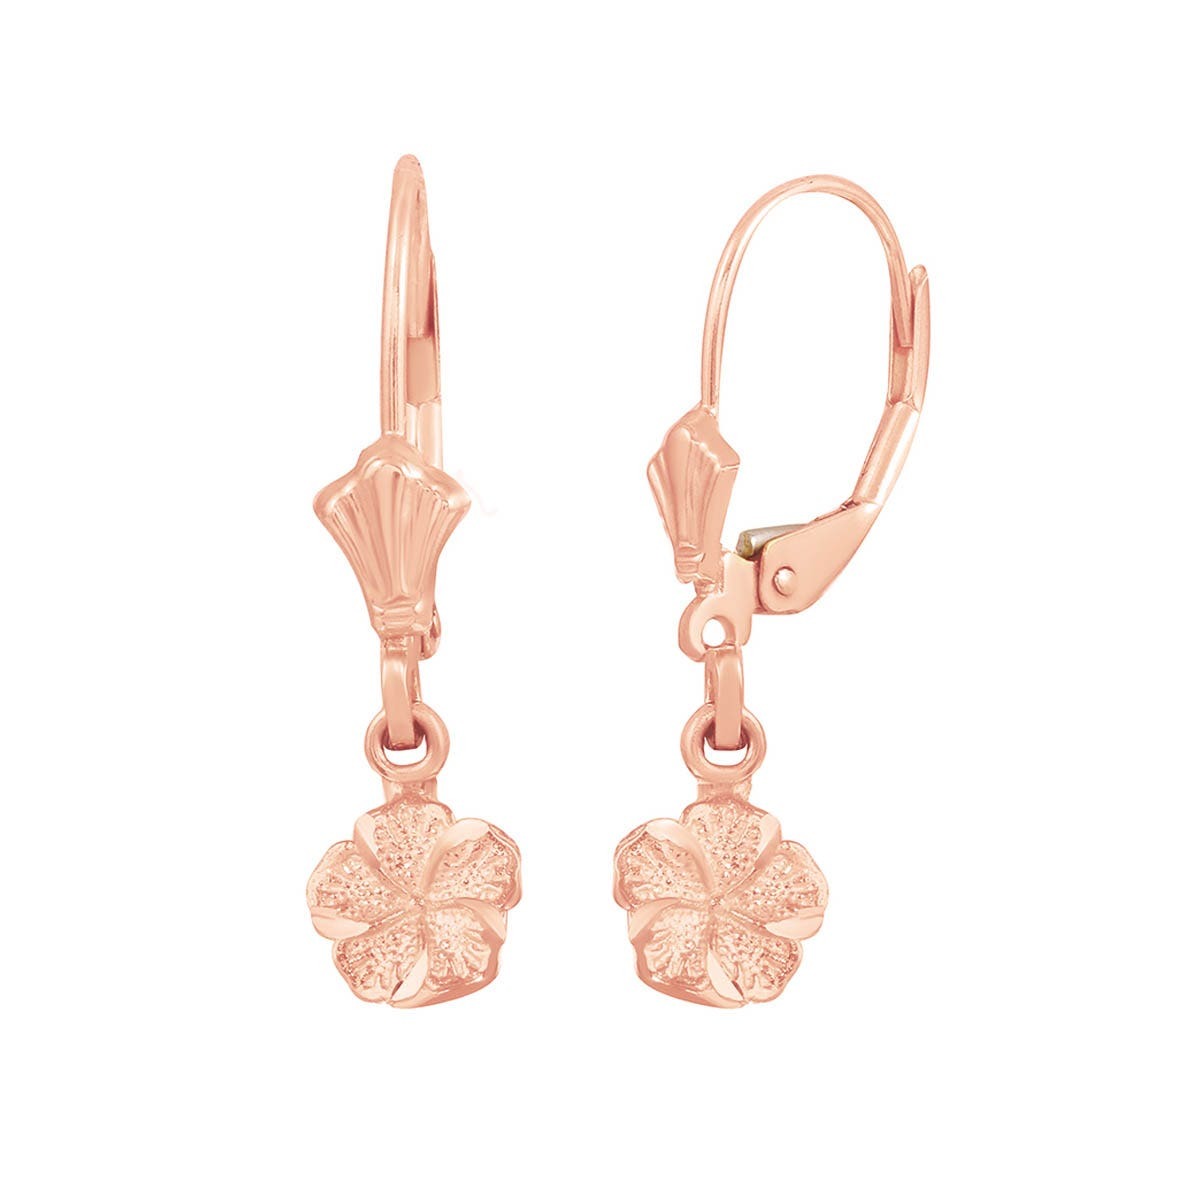 Man Earrings Rose at Gold Boutique GOOFASH